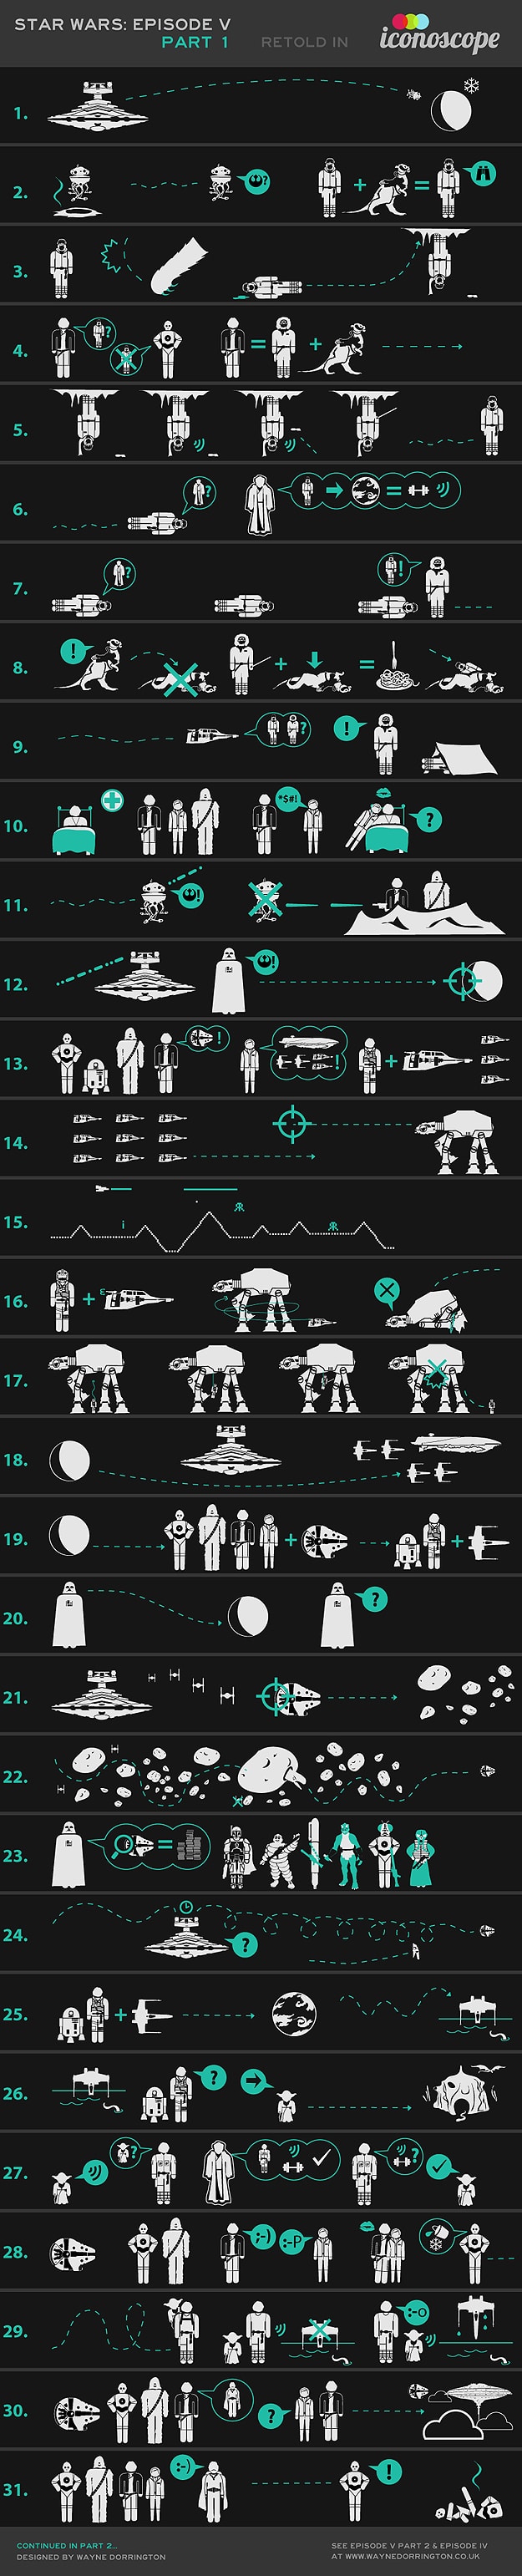 Empire Strikes Back In Icons